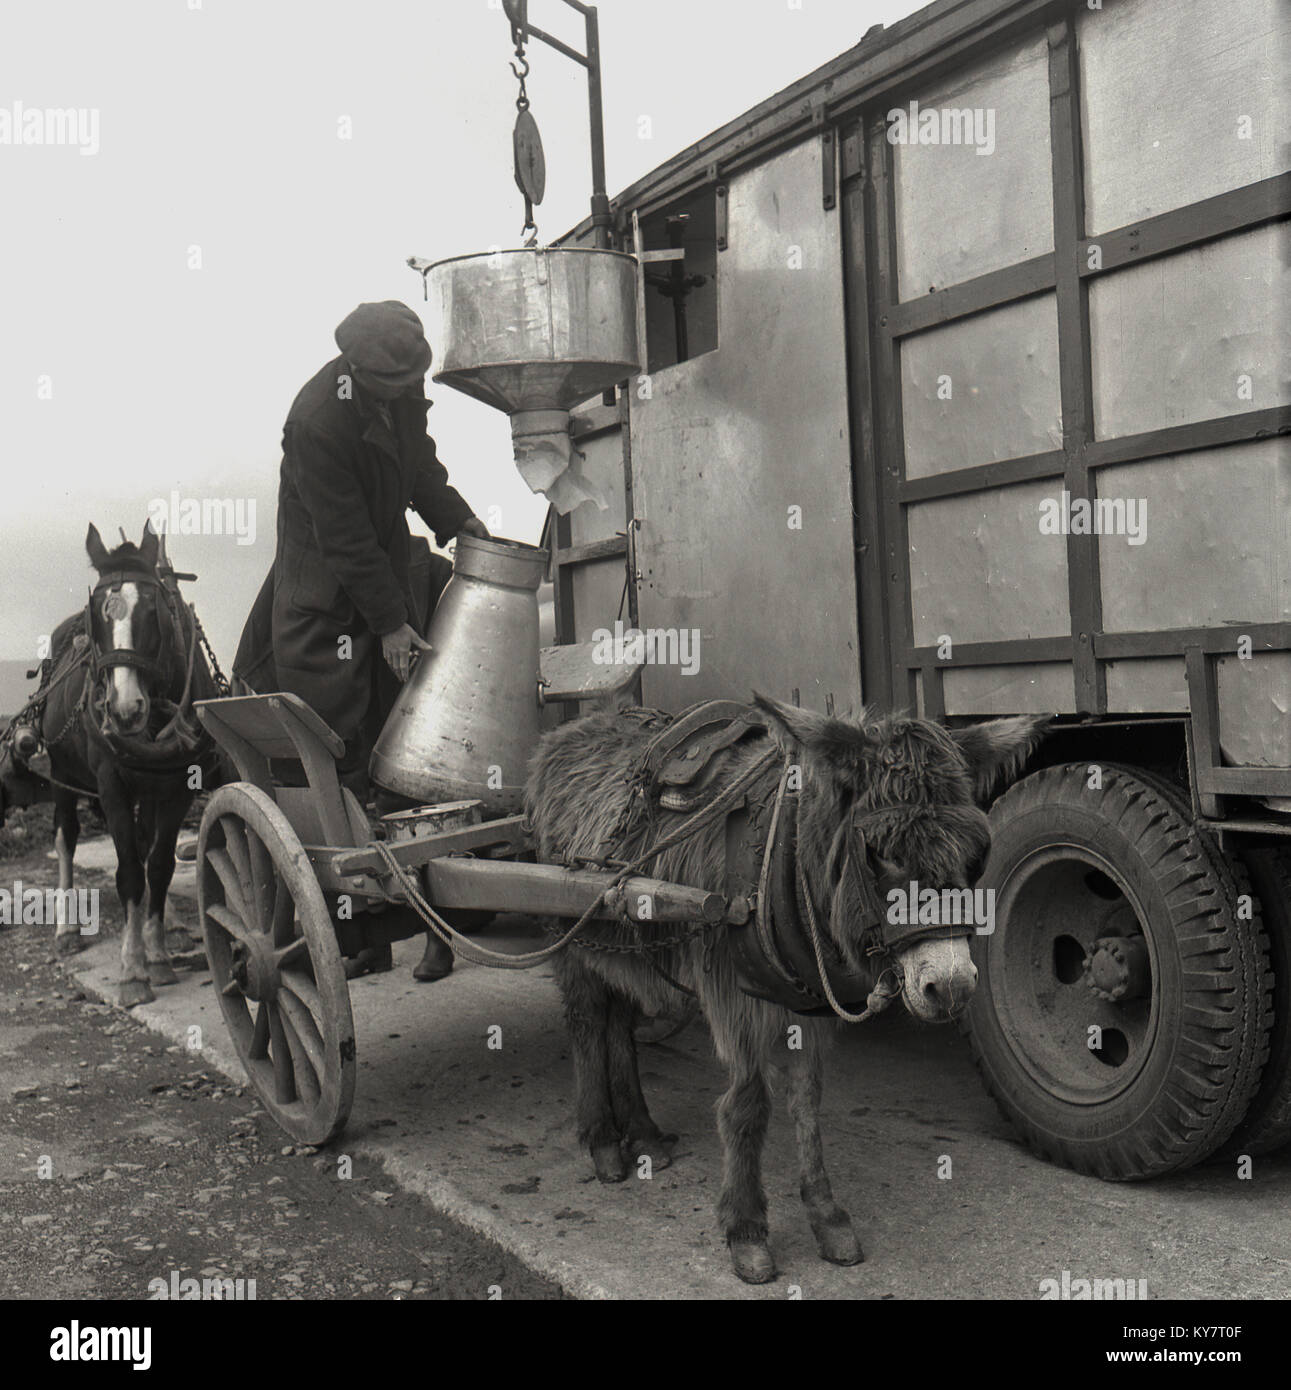 1950s, historical, man in coat and cap on the back of a donkey and cart filling up a metal milk churn with fresh milk from a dispenser hanging from a mobile unit, Ireland. Stock Photo